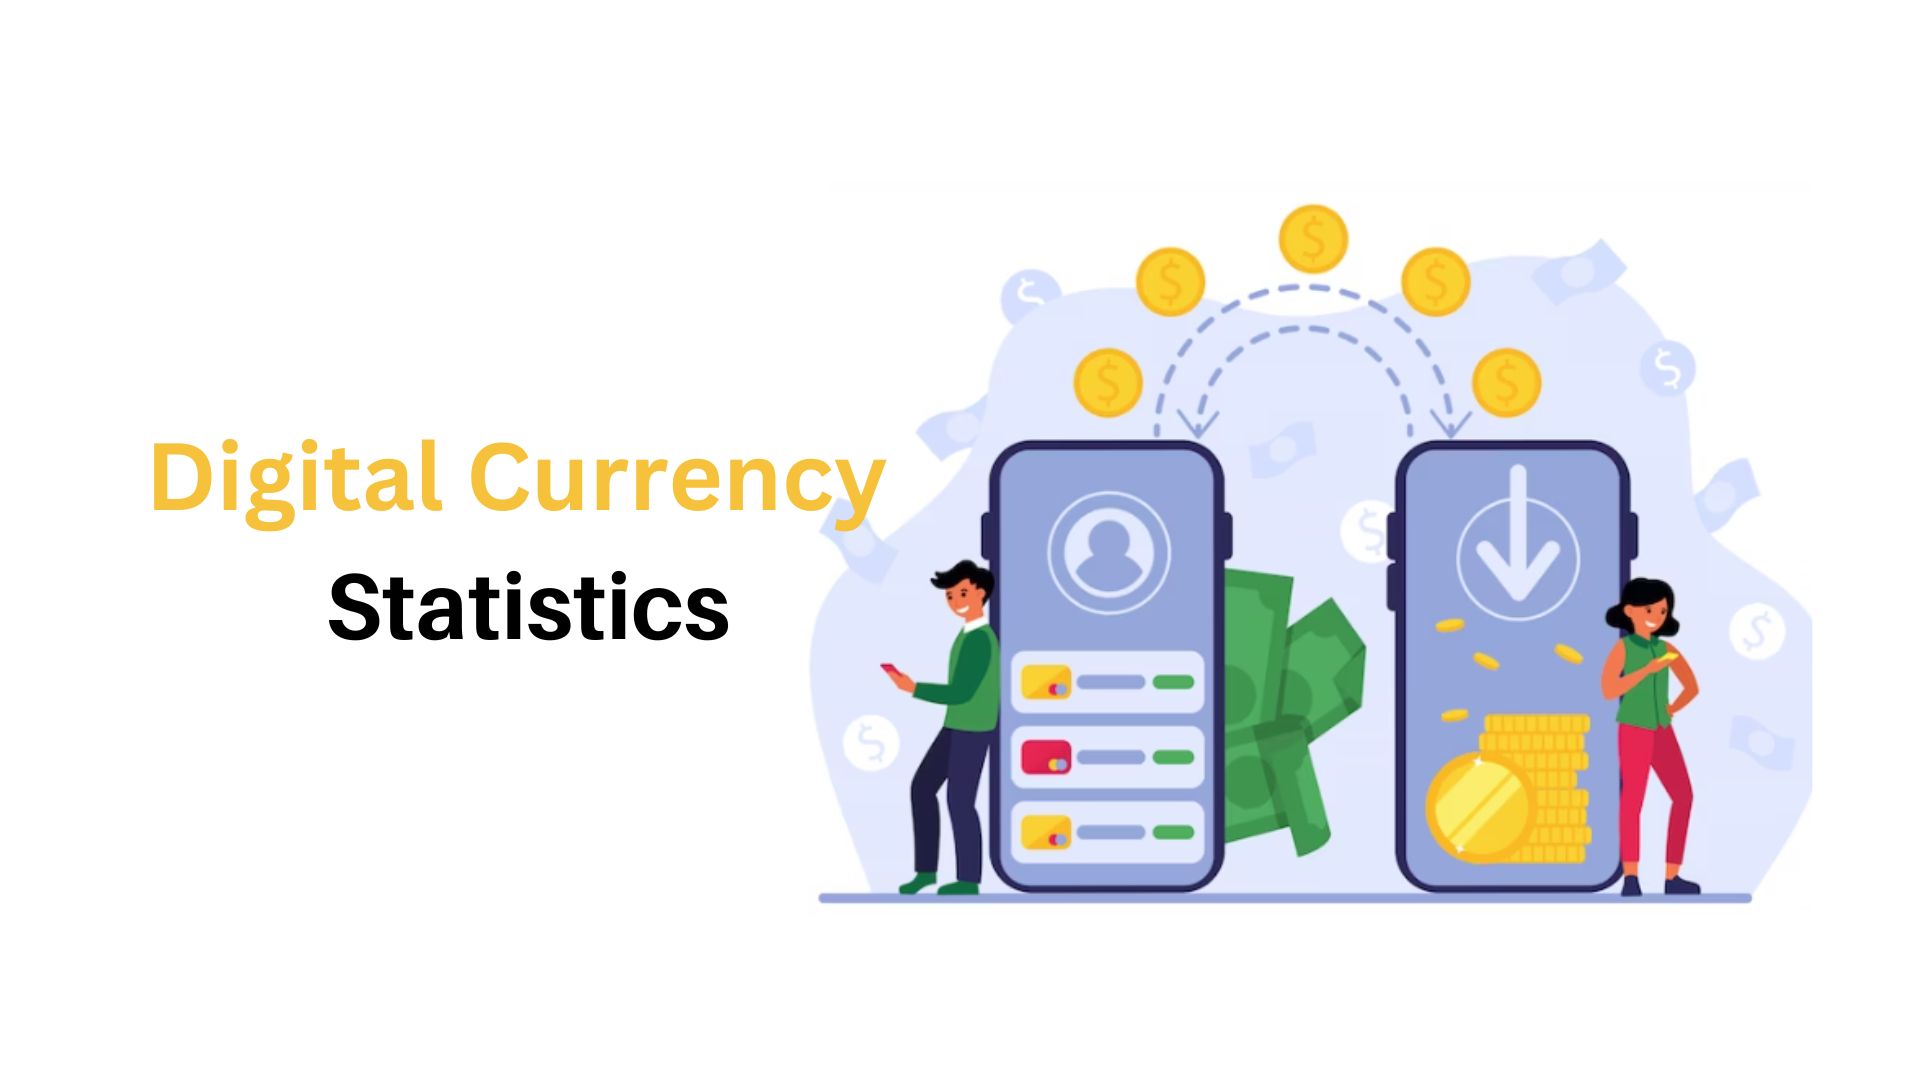 Digital Currency Statistics 2023 – By Global Market Share, Price Prediction, Regional Analysis, Types,  Cryptocurrency, Statblecoins and CBDCs